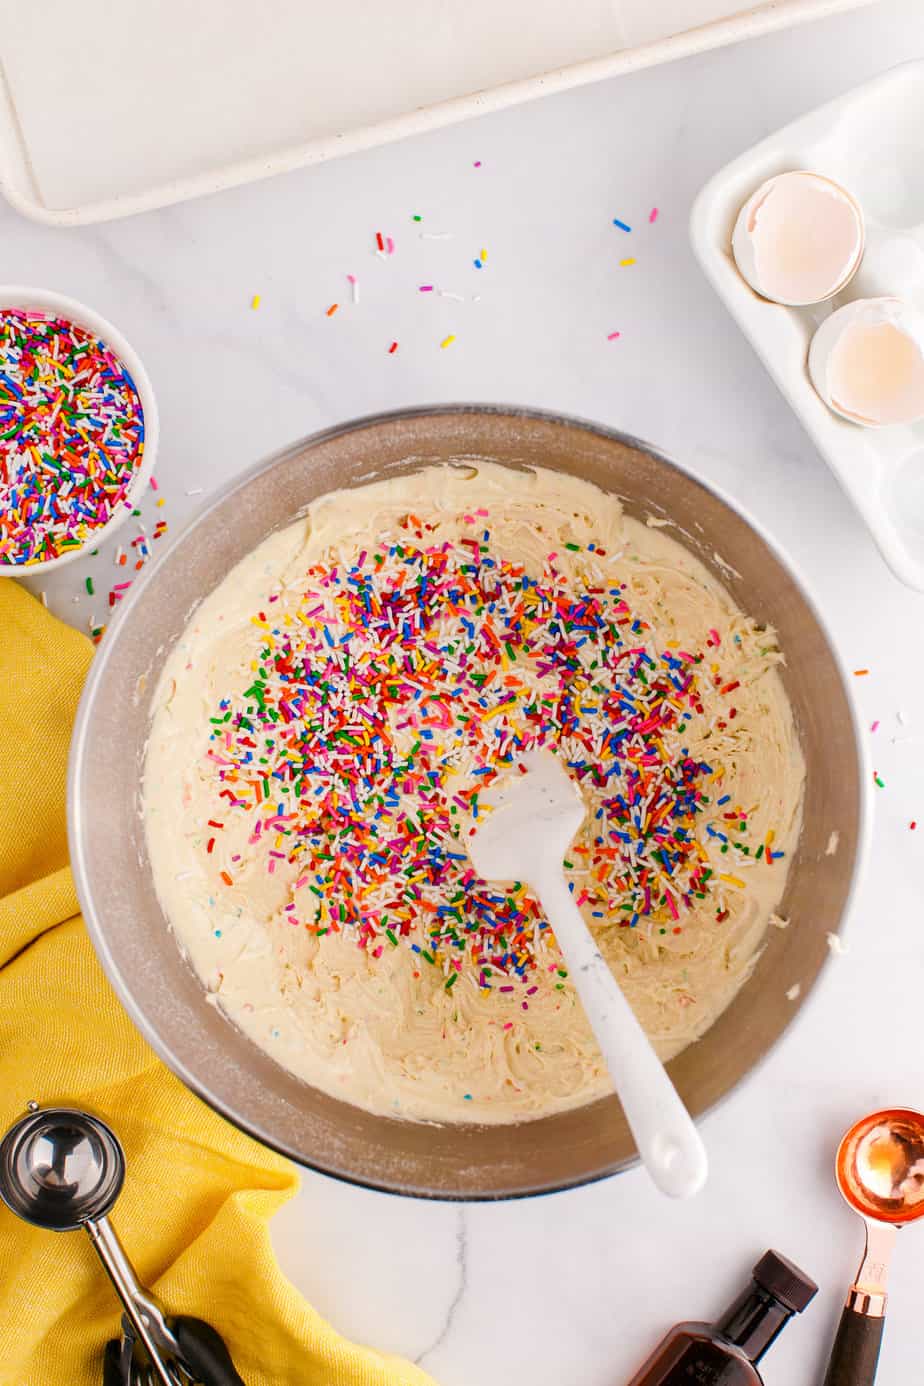 Mixing sprinkles into the funfetti cookie dough in a mixing bowl from above on a counter.